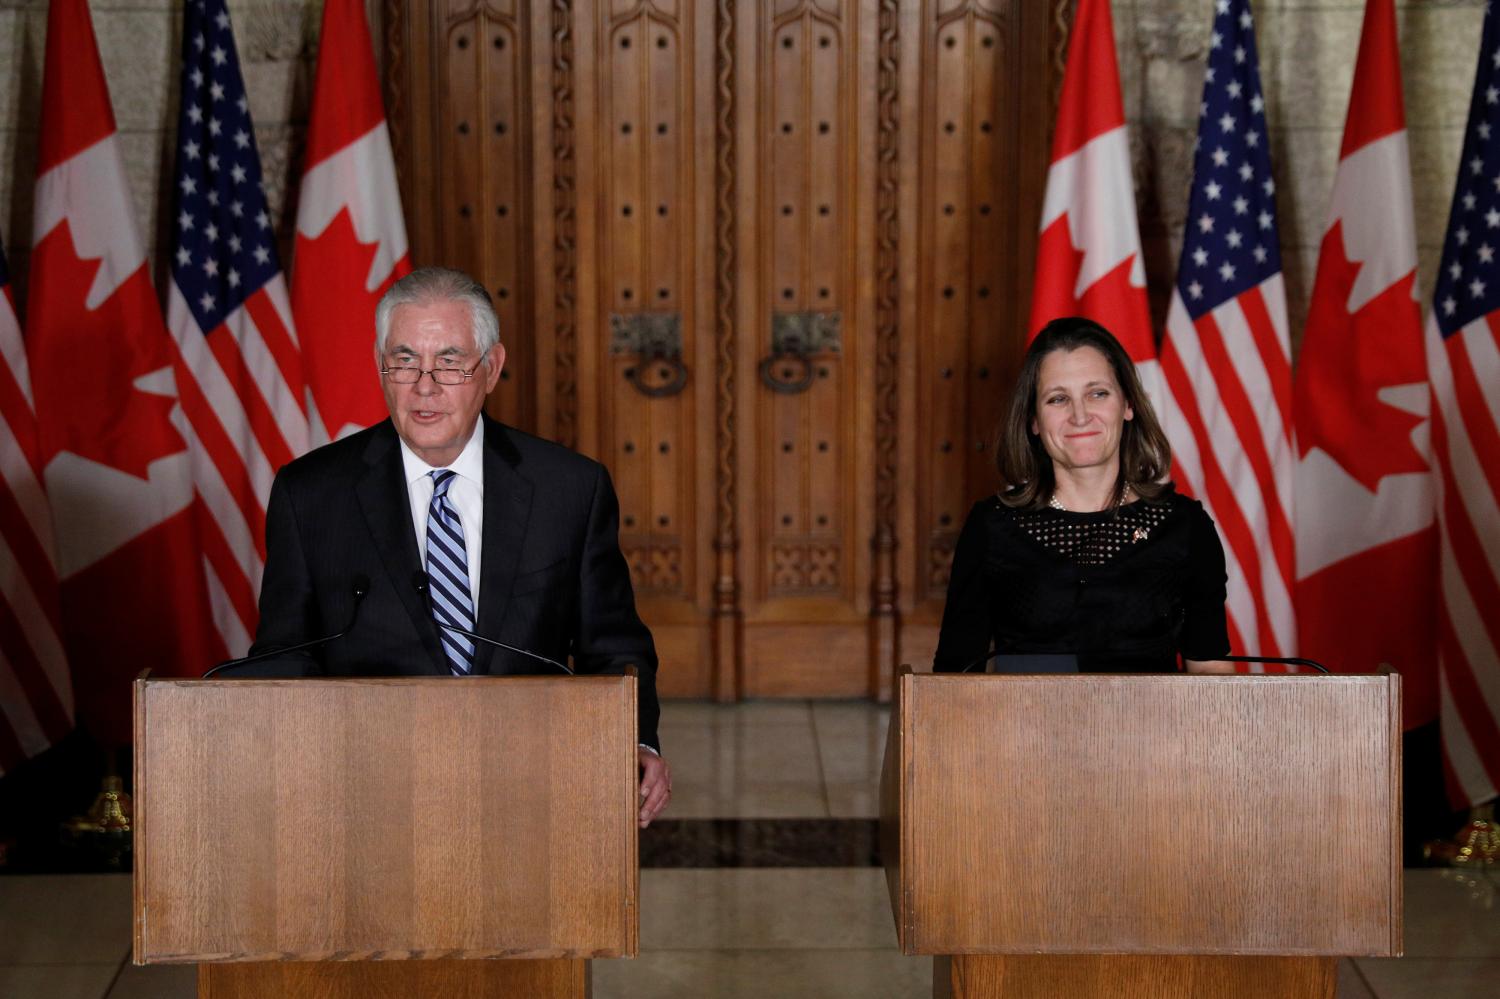 U.S. Secretary of State Rex Tillerson (L) and Canada's Foreign Minister Chrystia Freeland take part in a news conference on Parliament Hill in Ottawa, Ontario, Canada, December 19, 2017. REUTERS/Blair Gable - RC122CAB46E0